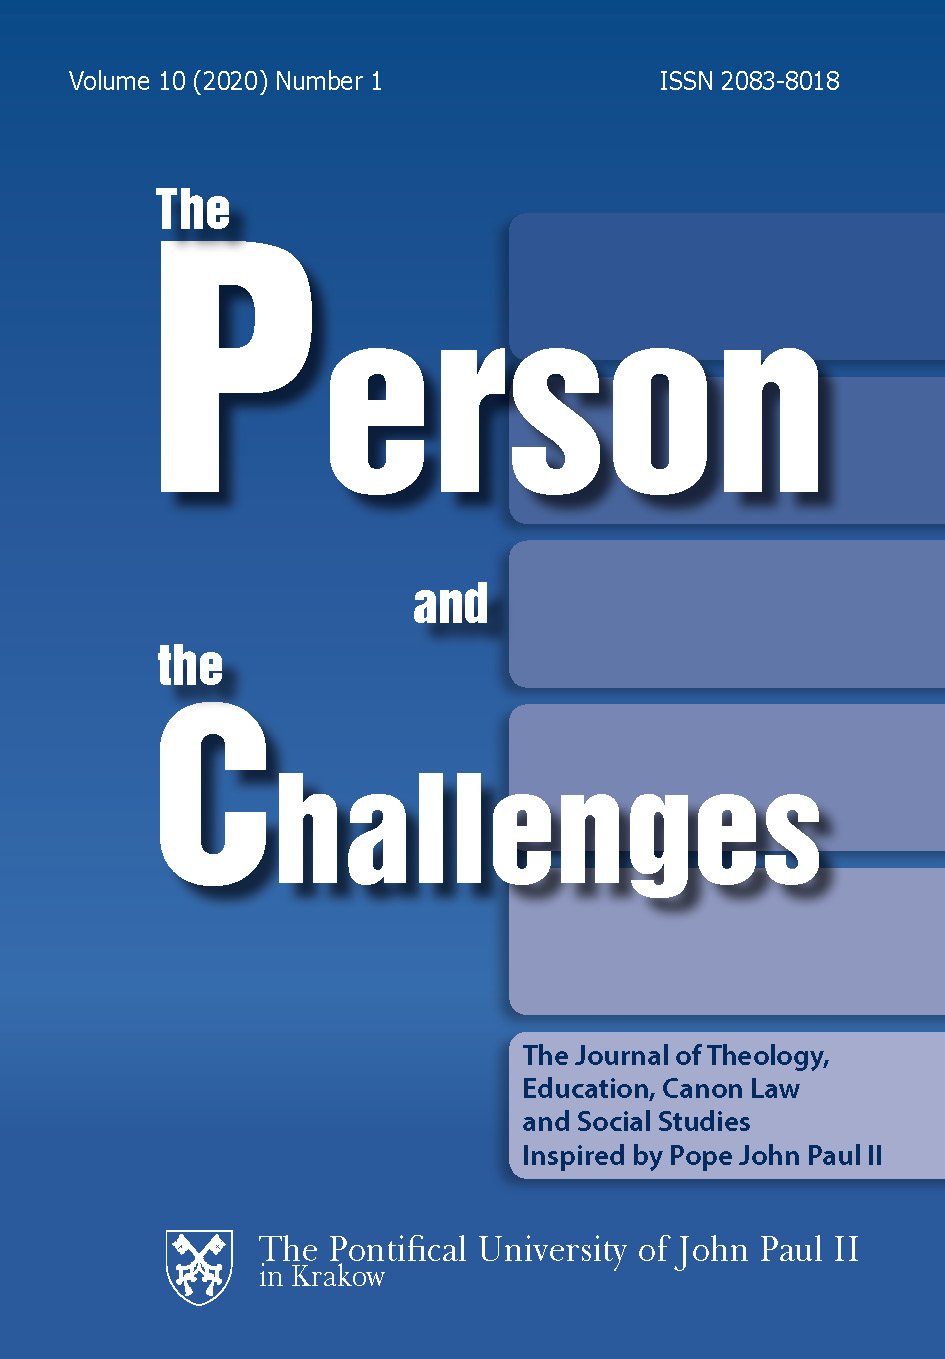 Mass Media as the Key Space for Preaching and Defending Christian Personalism Cover Image